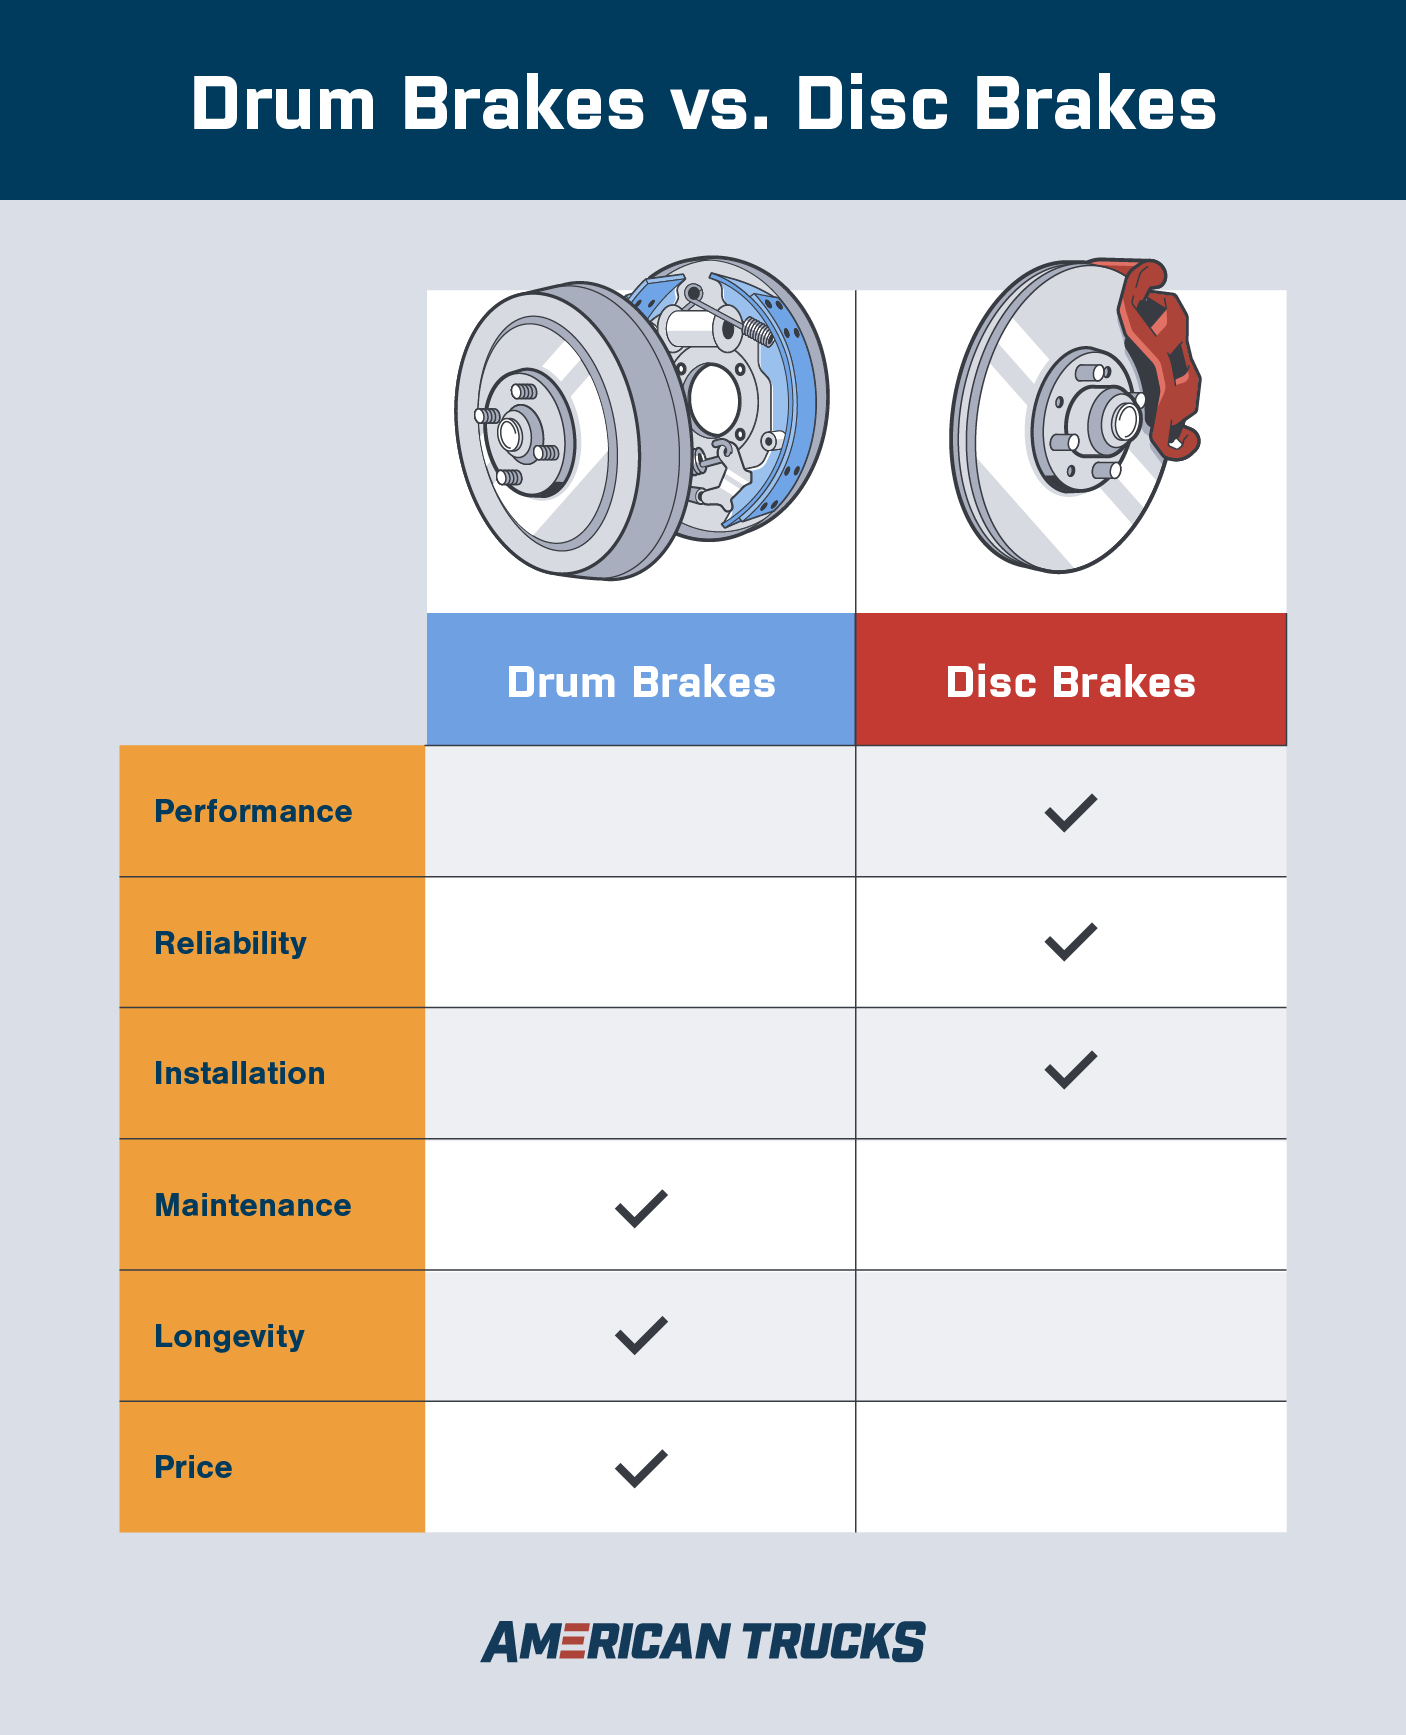 Chart showing a comparison of drum brakes and disc brakes with drum brakes having superior maintenance, longevity, and price and disc brakes having superior performance, reliability, and installation.